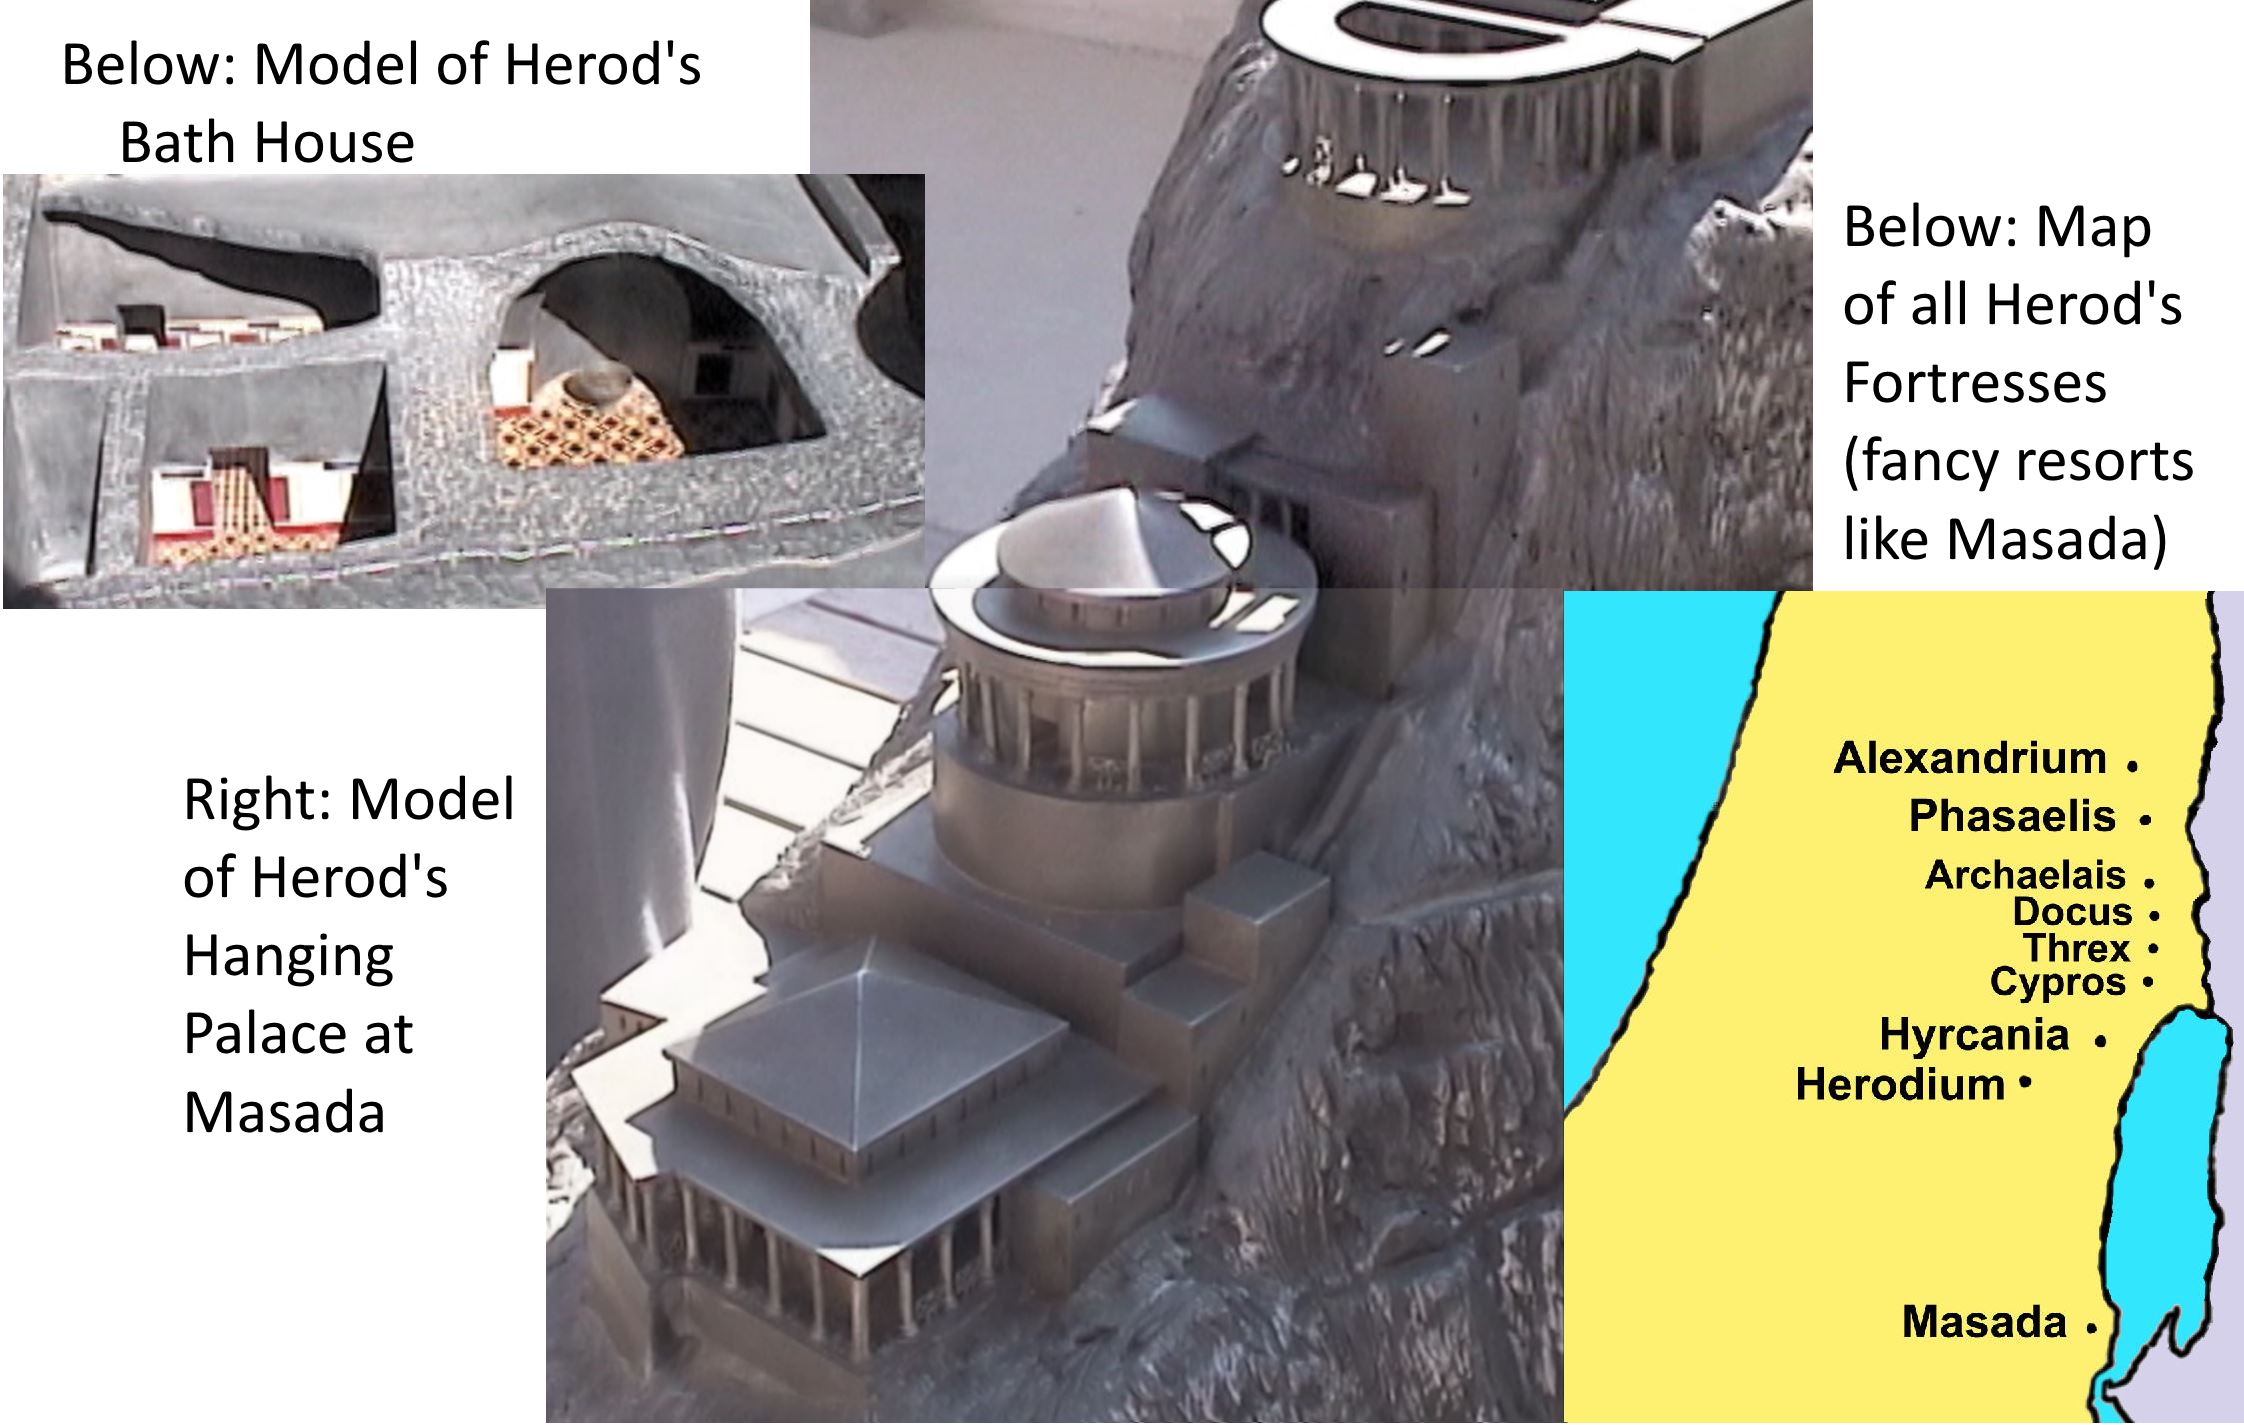 models of Masada fortress and map of Herods fortresses